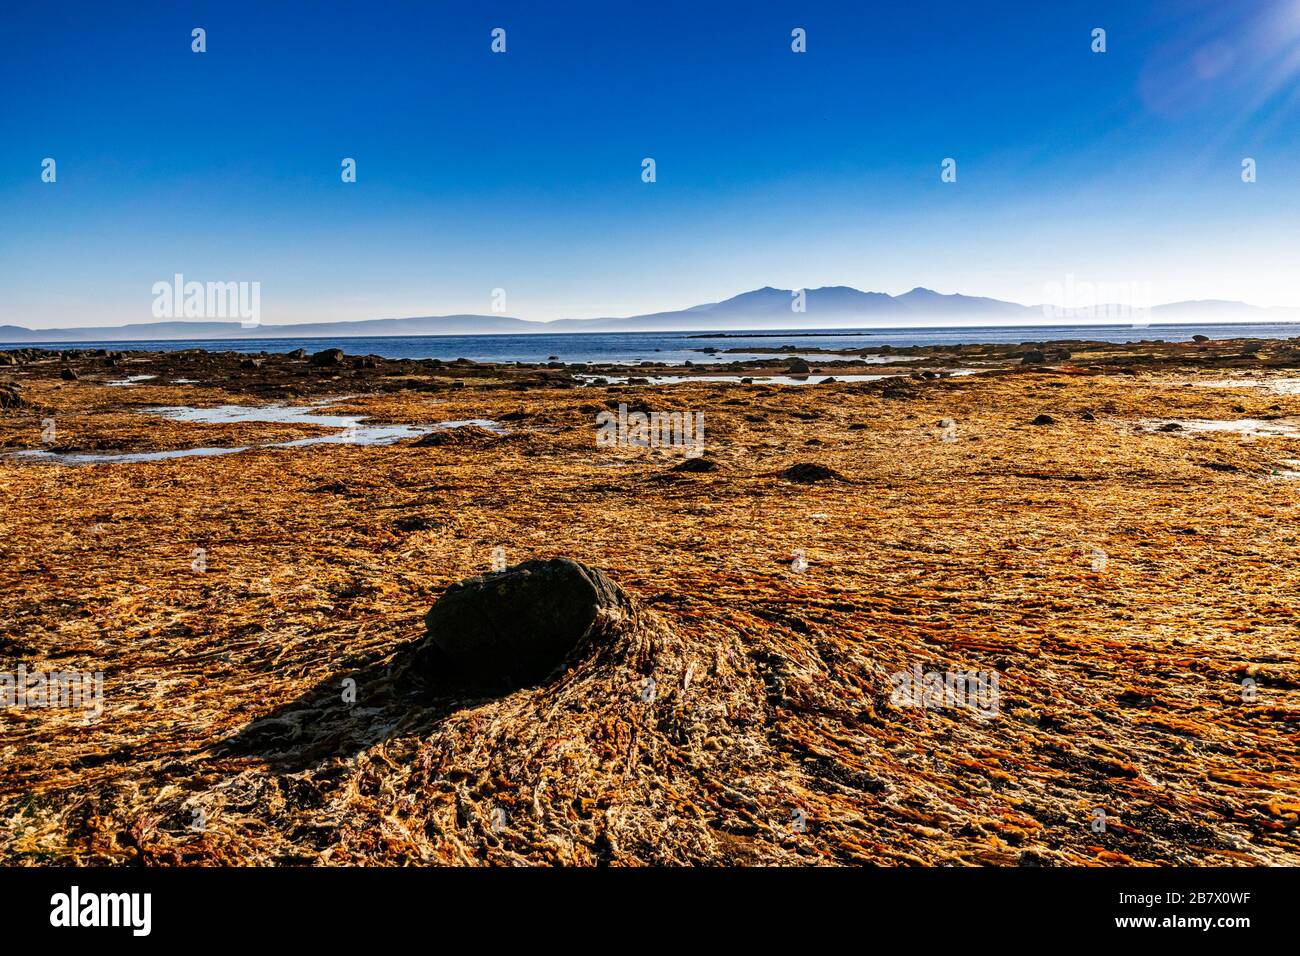 Picturesque silhouette of Isle of Arran seen from the beach at low tide covered in yellow seaweed near Seamill, Scotland. Stock Photo